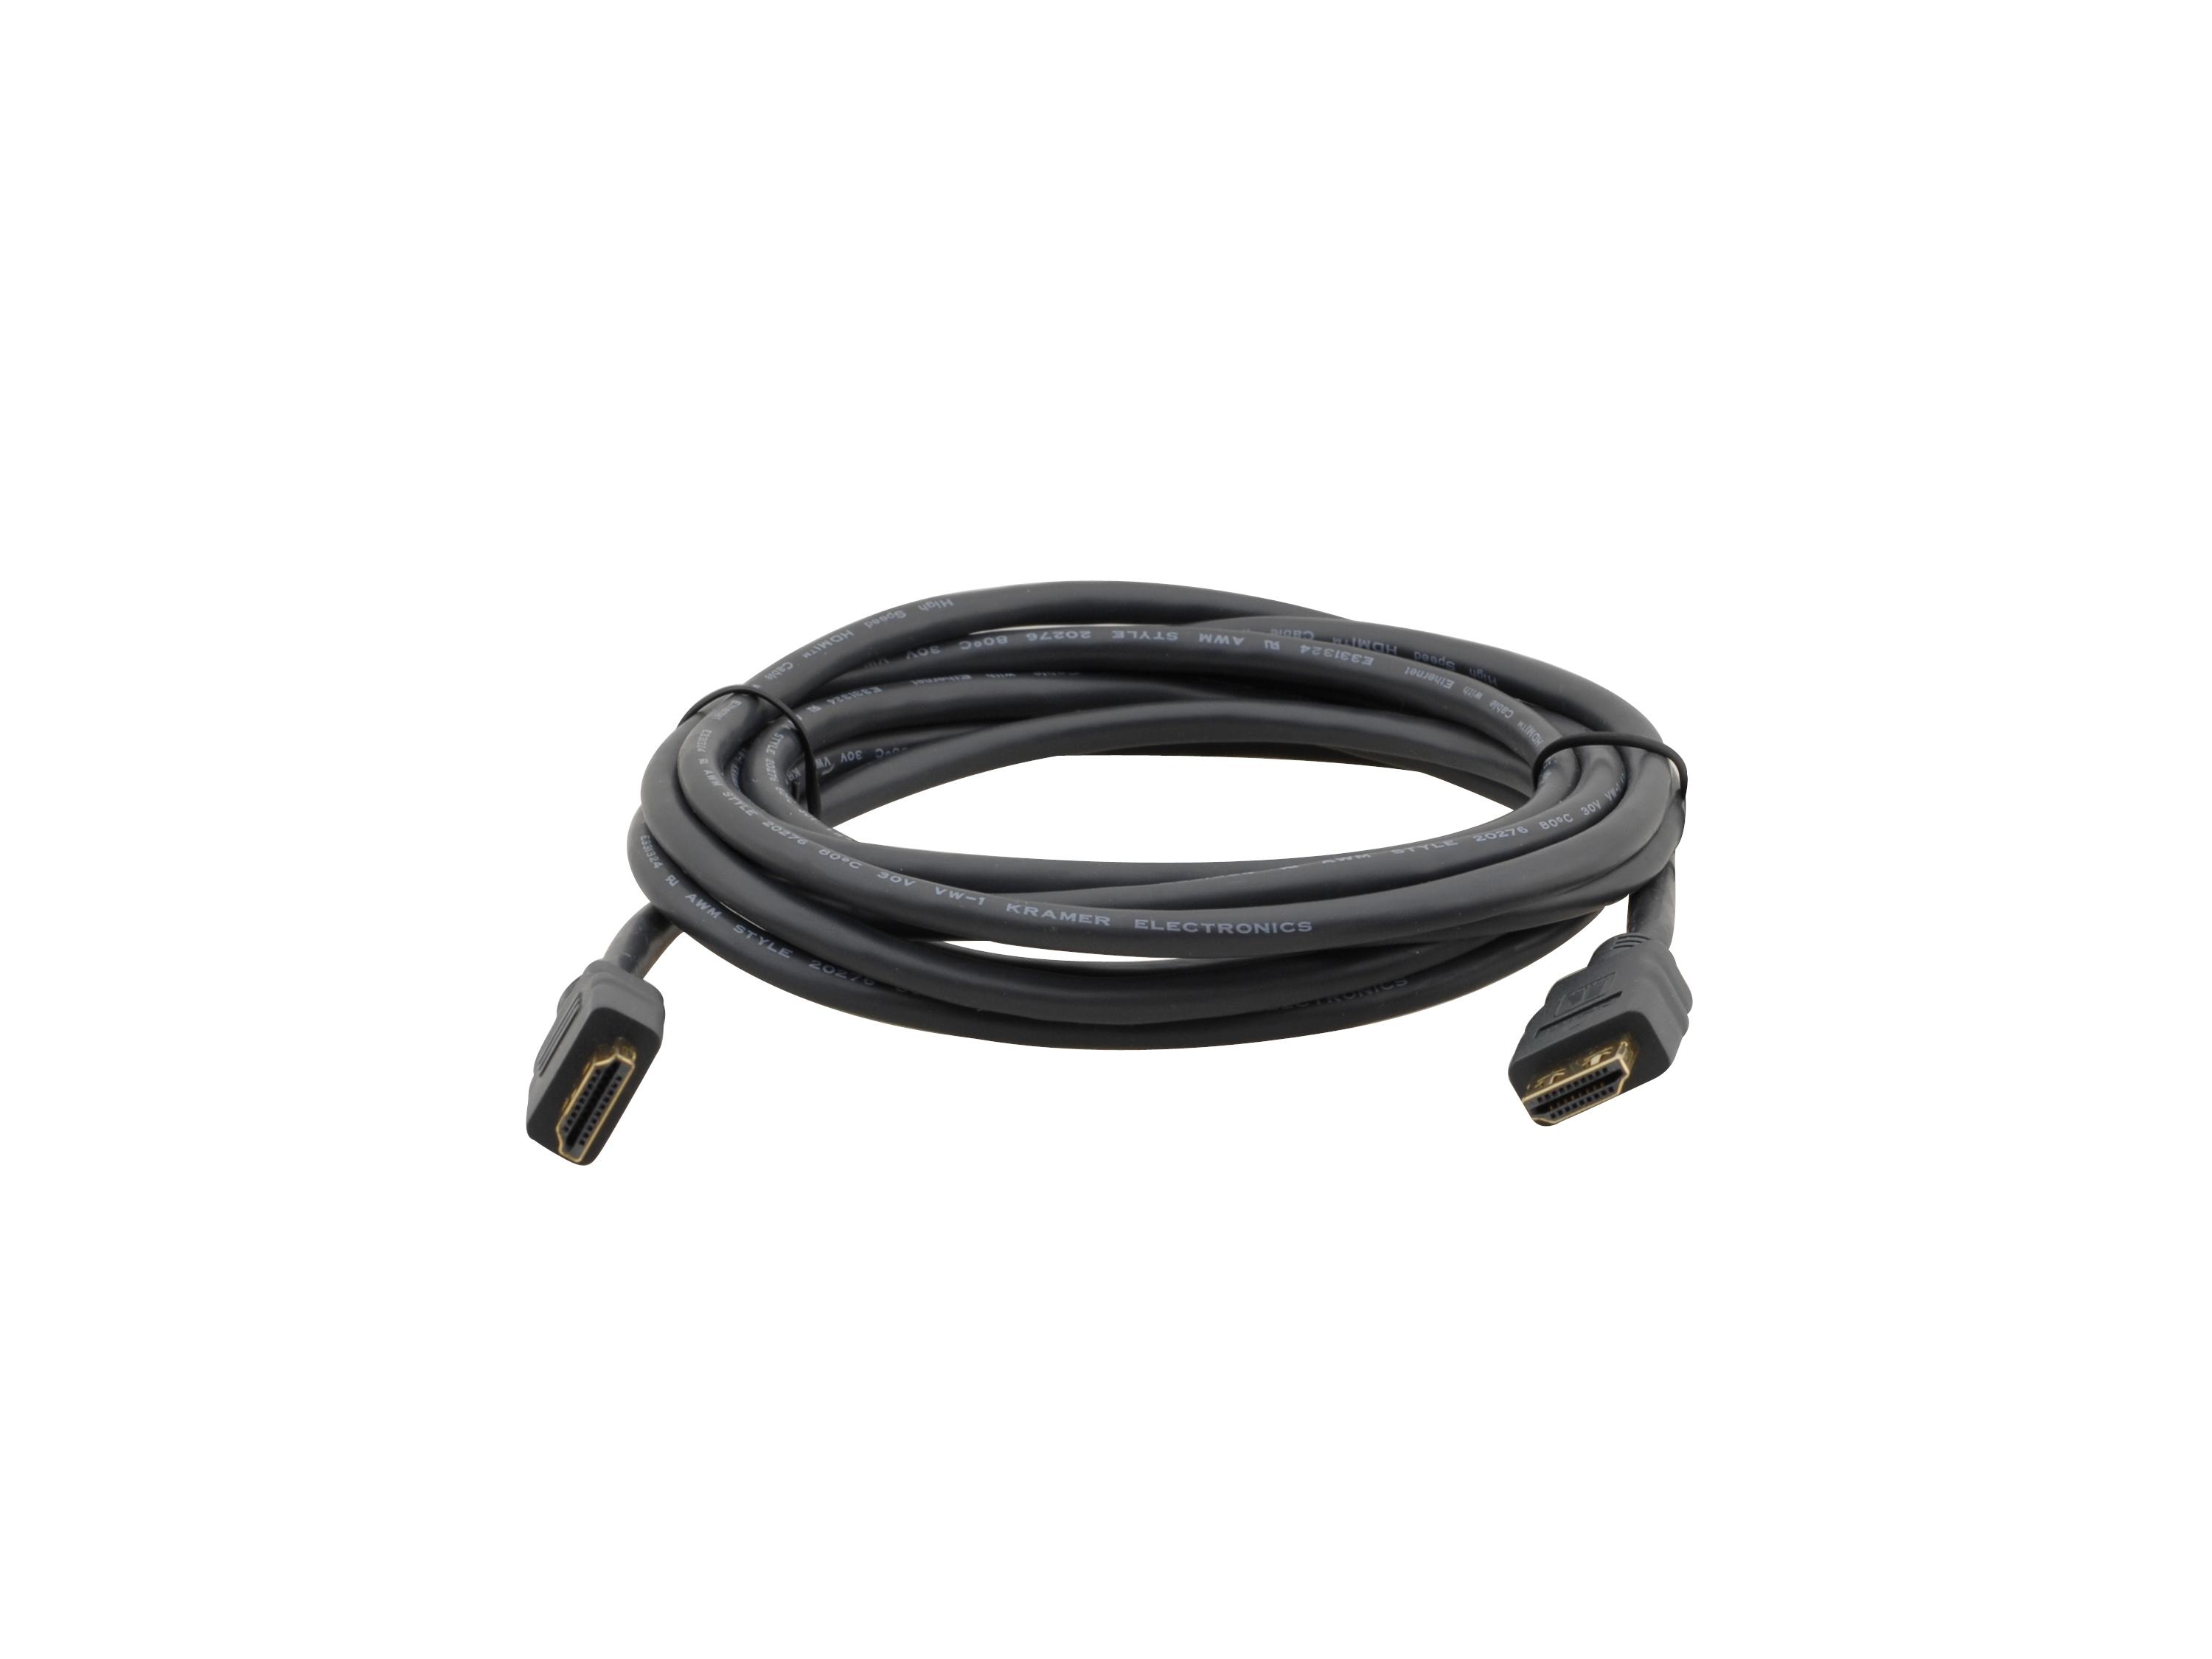 C-MHM/MHM-35 High-Speed HDMI Flexible Cable with Ethernet 35ft by Kramer